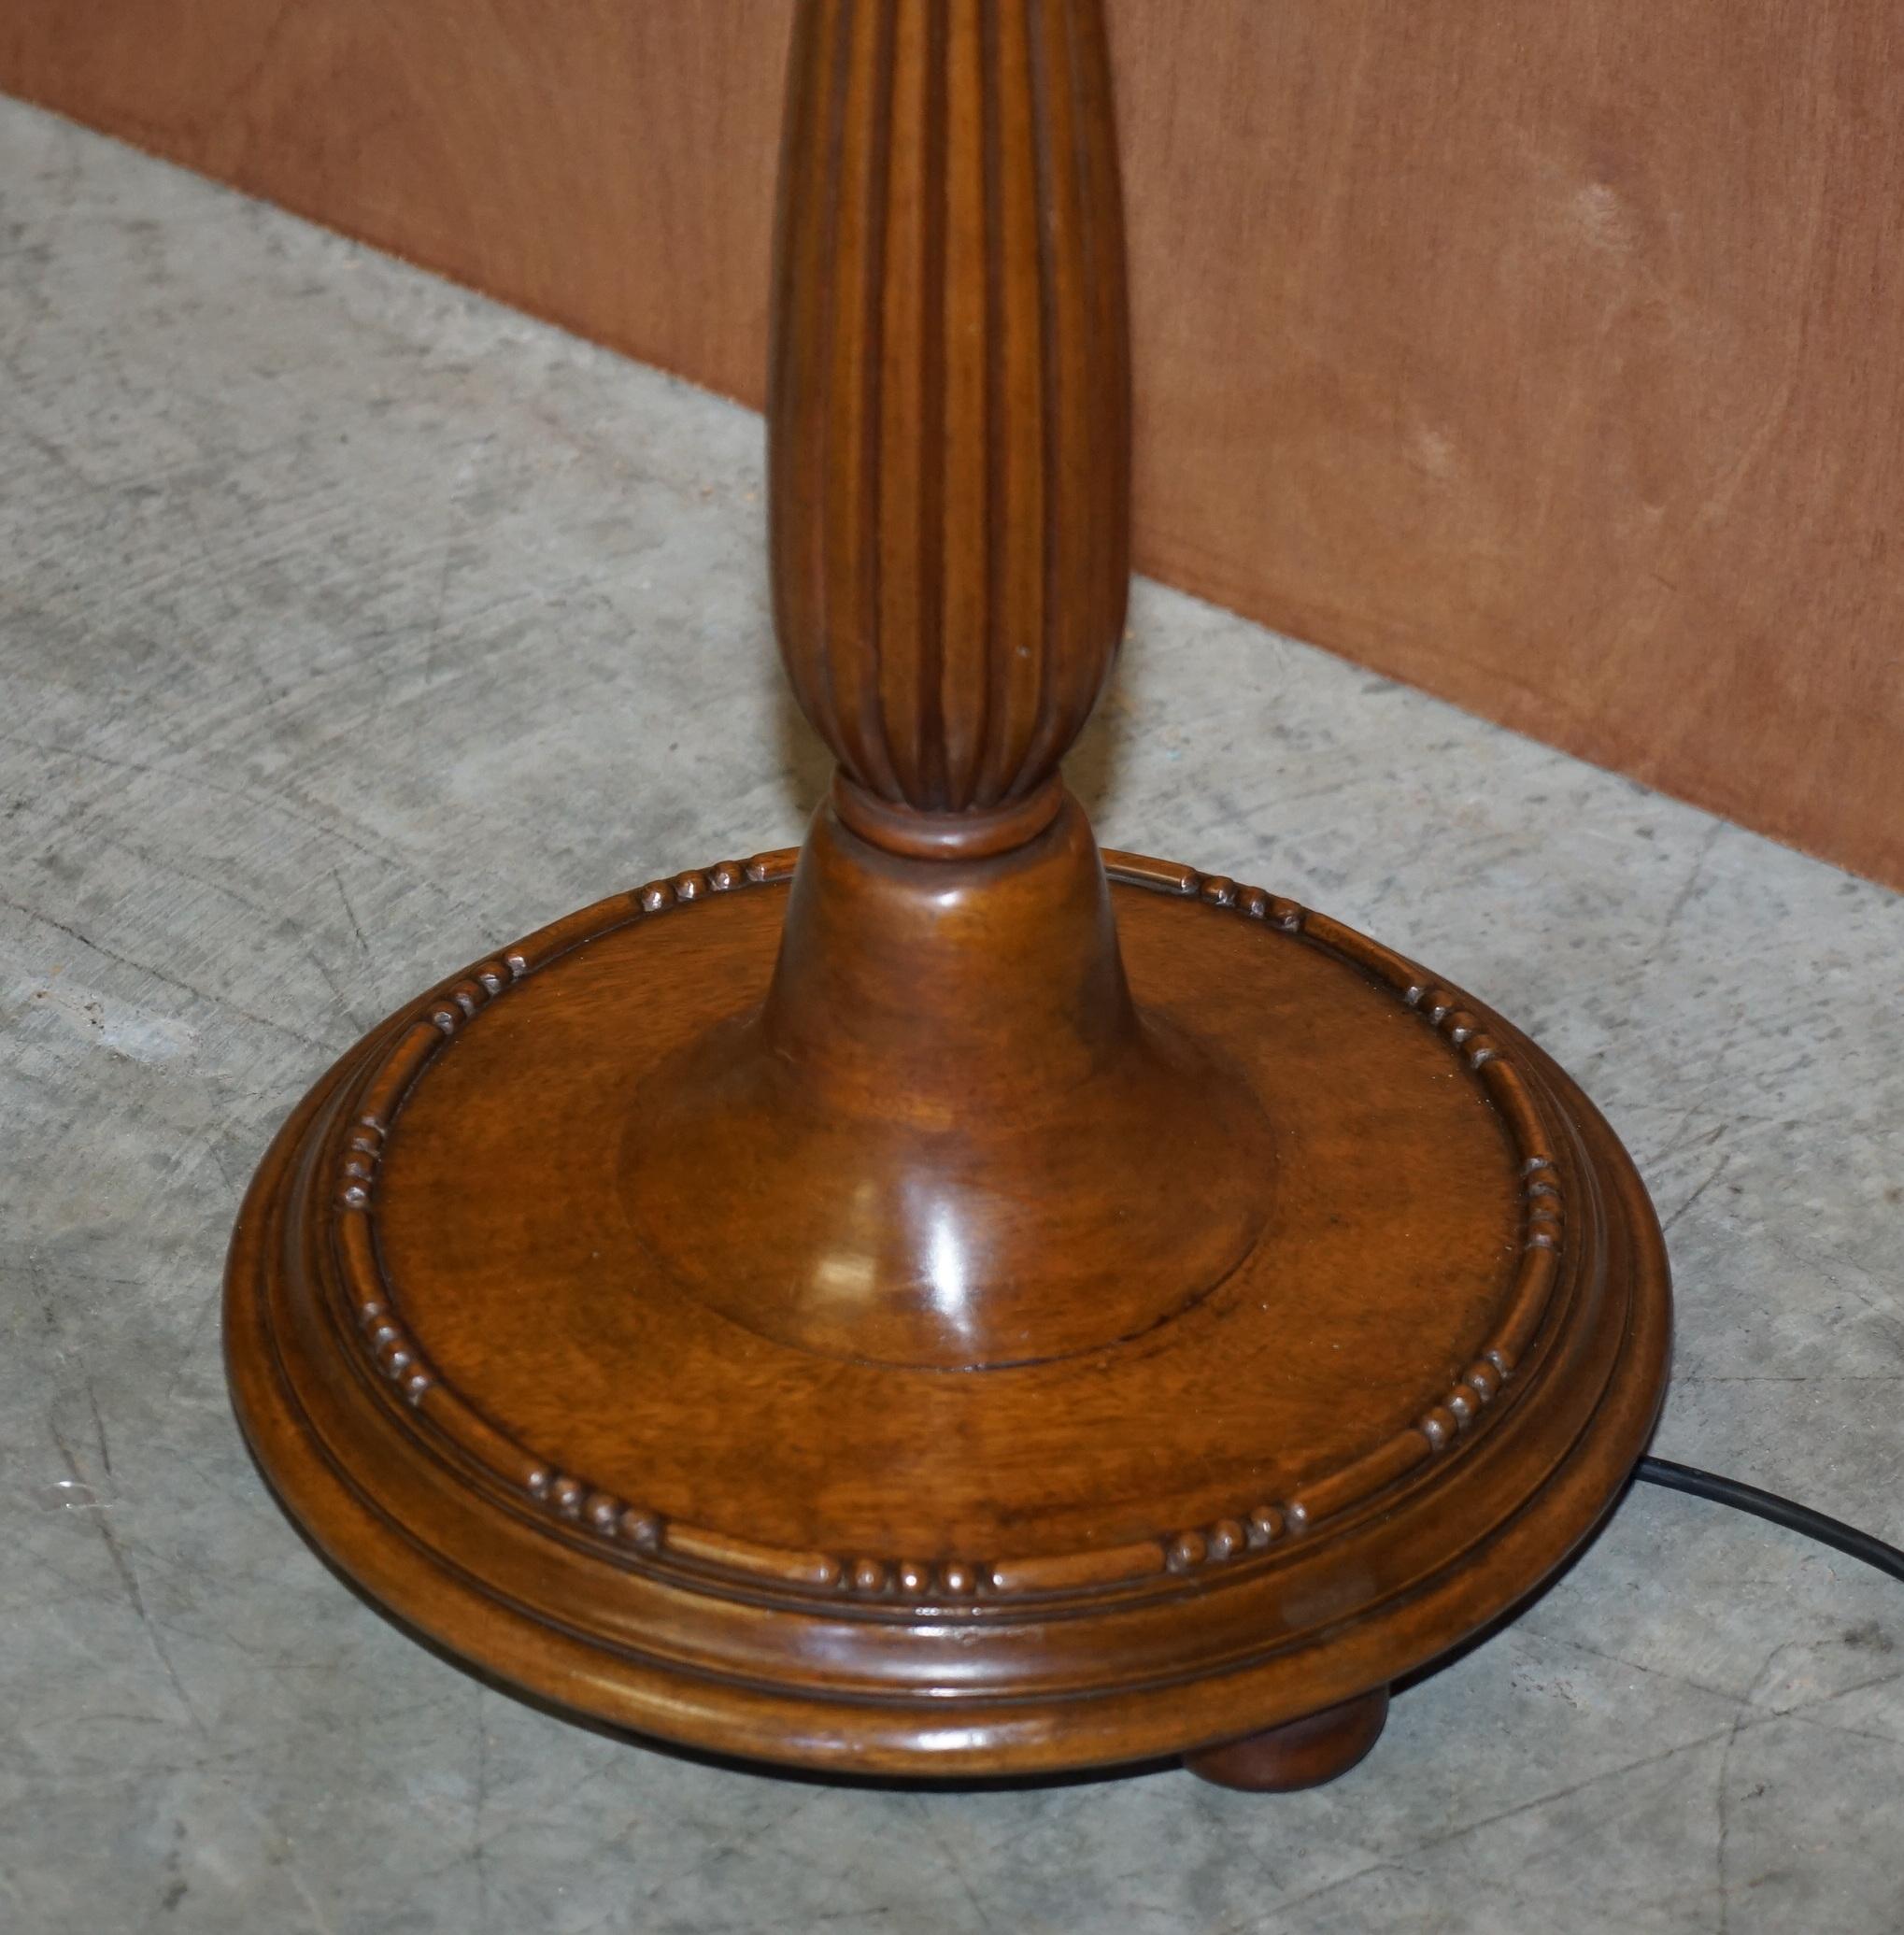 We are delighted to offer for sale this stunning hand made in Scotland, oak floor standing lamp 

A good looking and decorative piece that has been fully restored. The timber has been cleaned waxed and polished, the fittings, cable and plug all